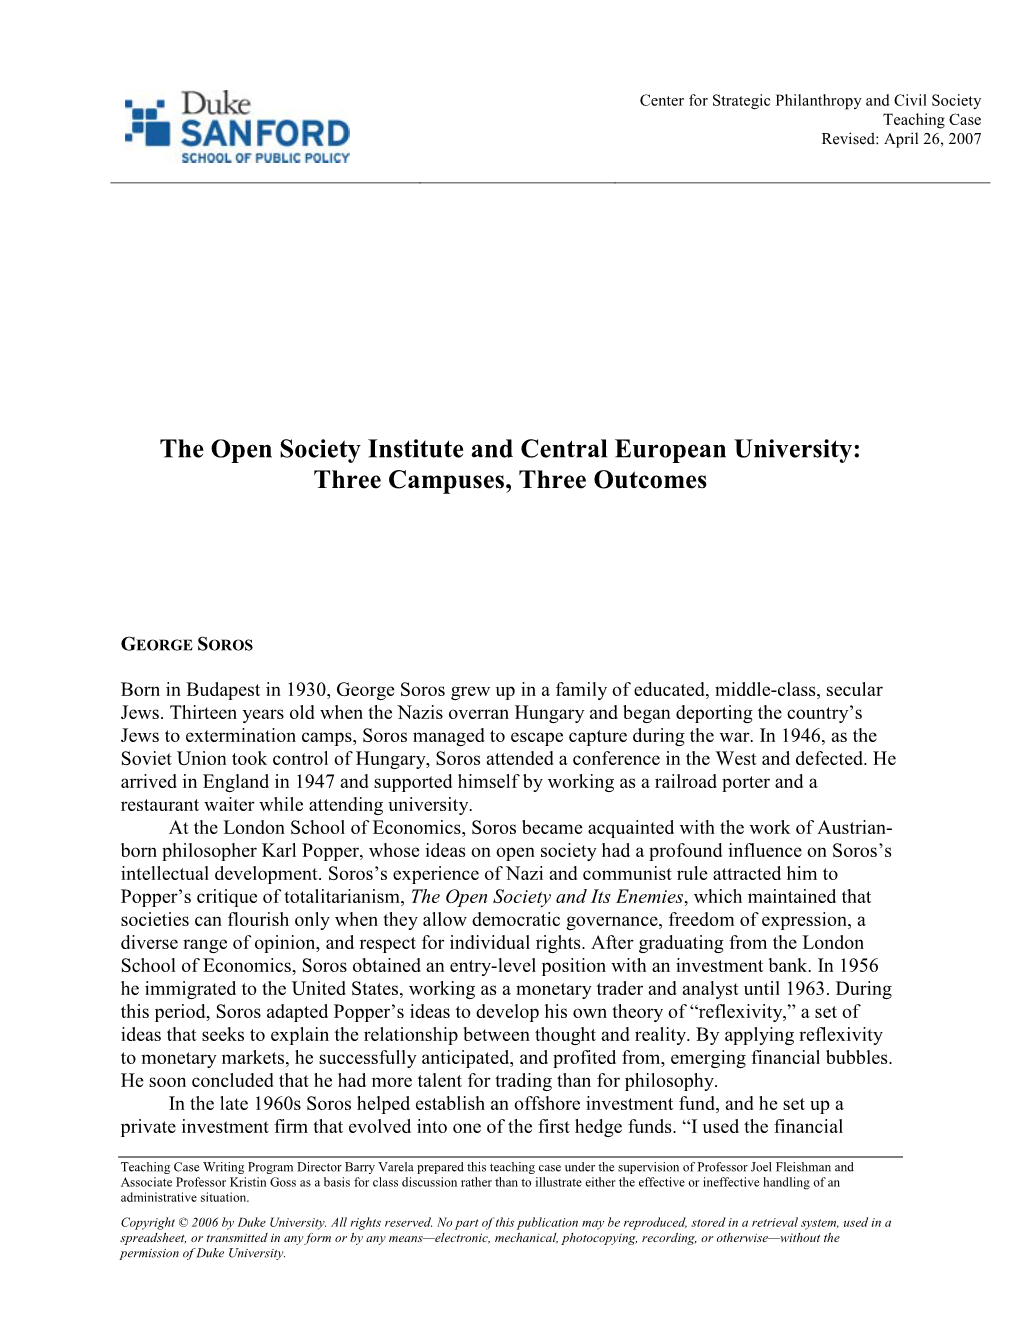 The Open Society Institute and Central European University: Three Campuses, Three Outcomes